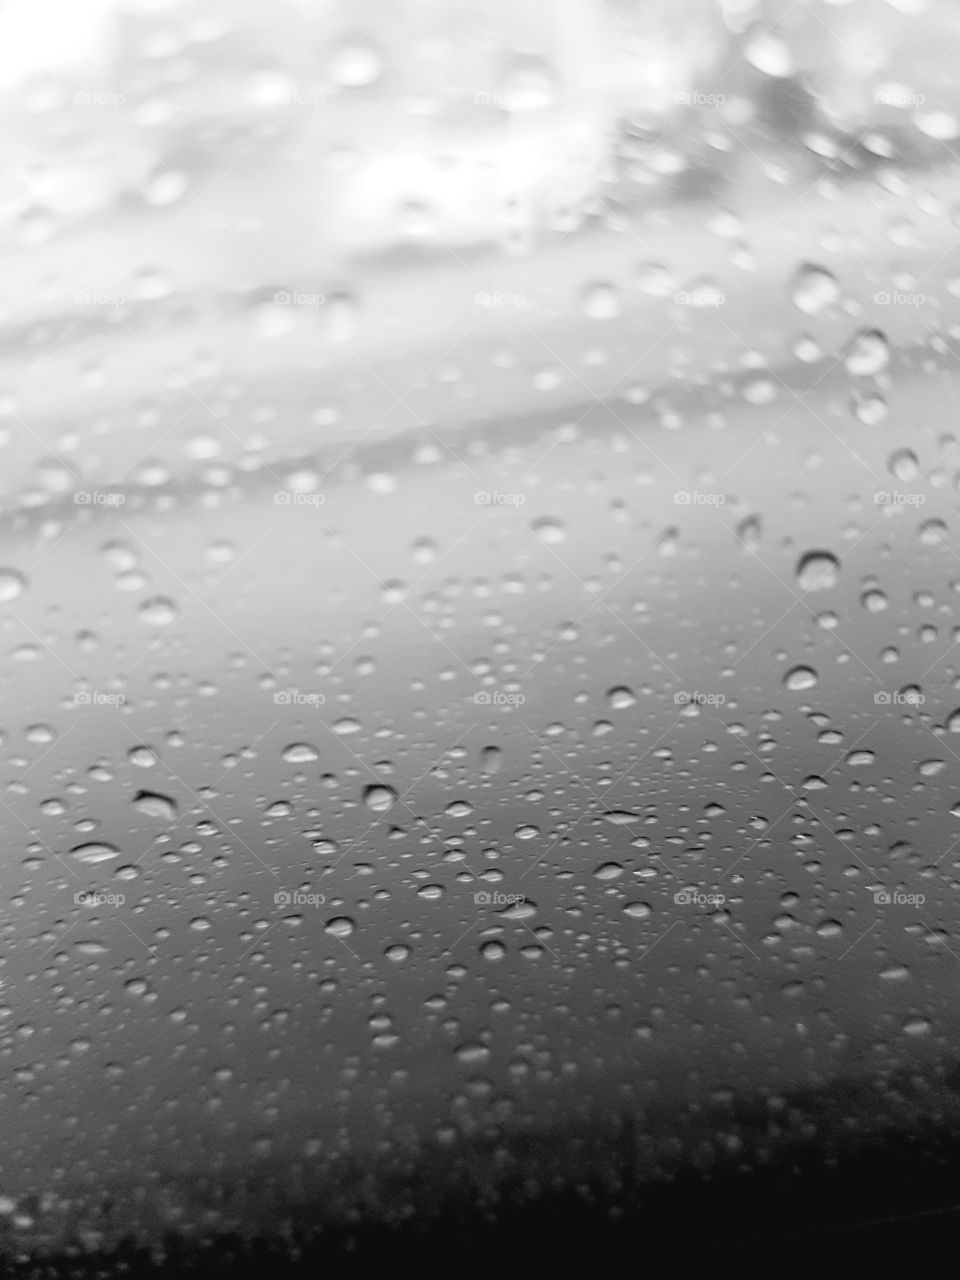 A very rainy day today. But it made for a dramatic picture of the rain on the window.